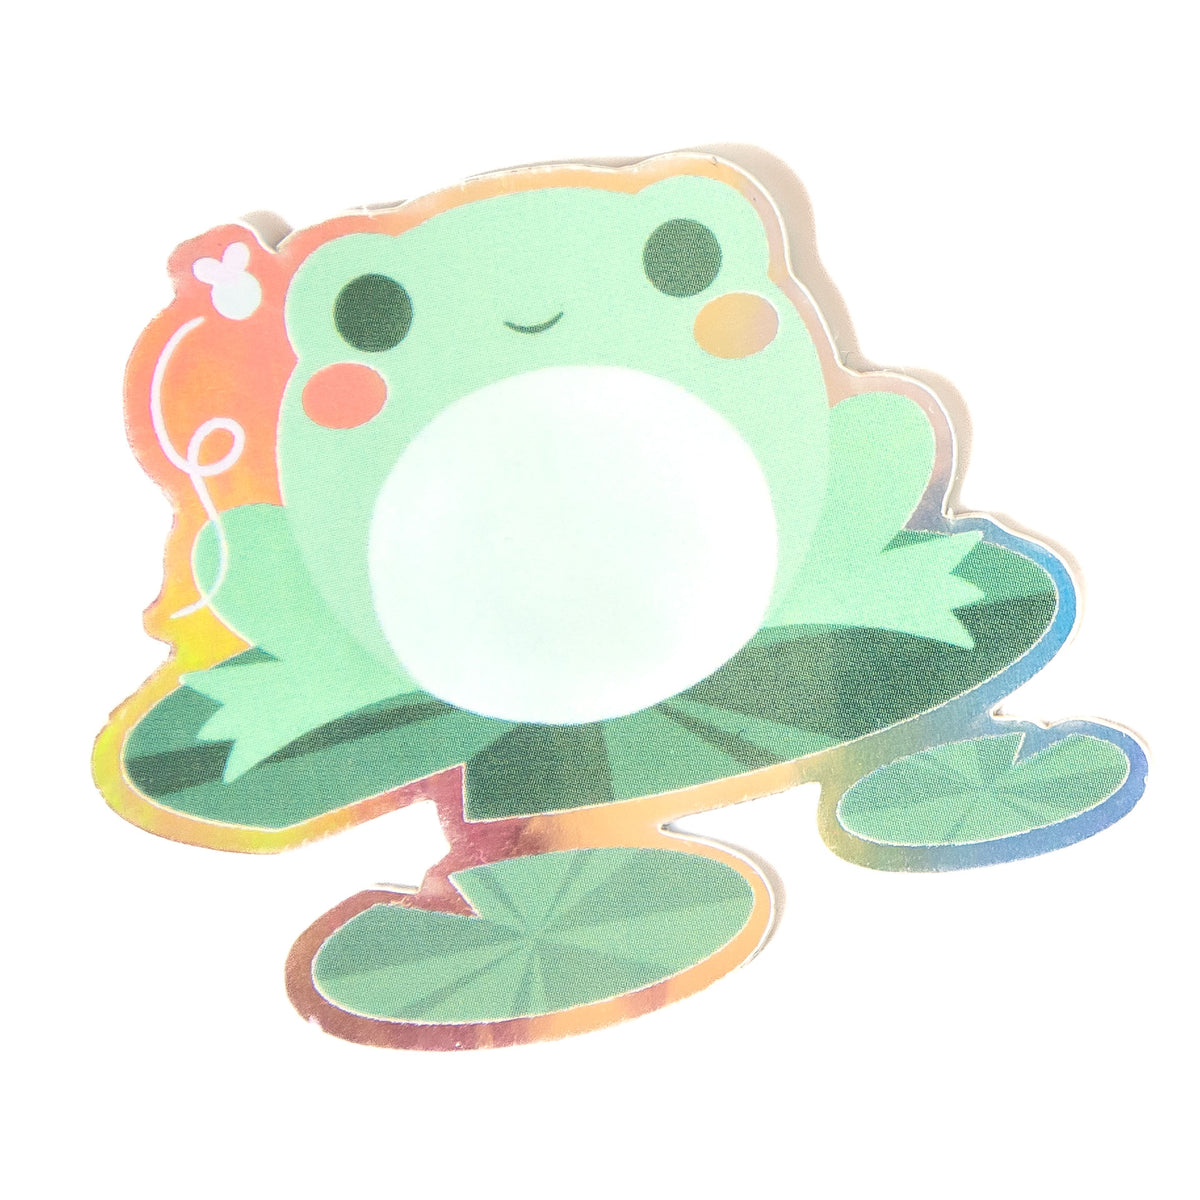 Cute frog holographic sticker